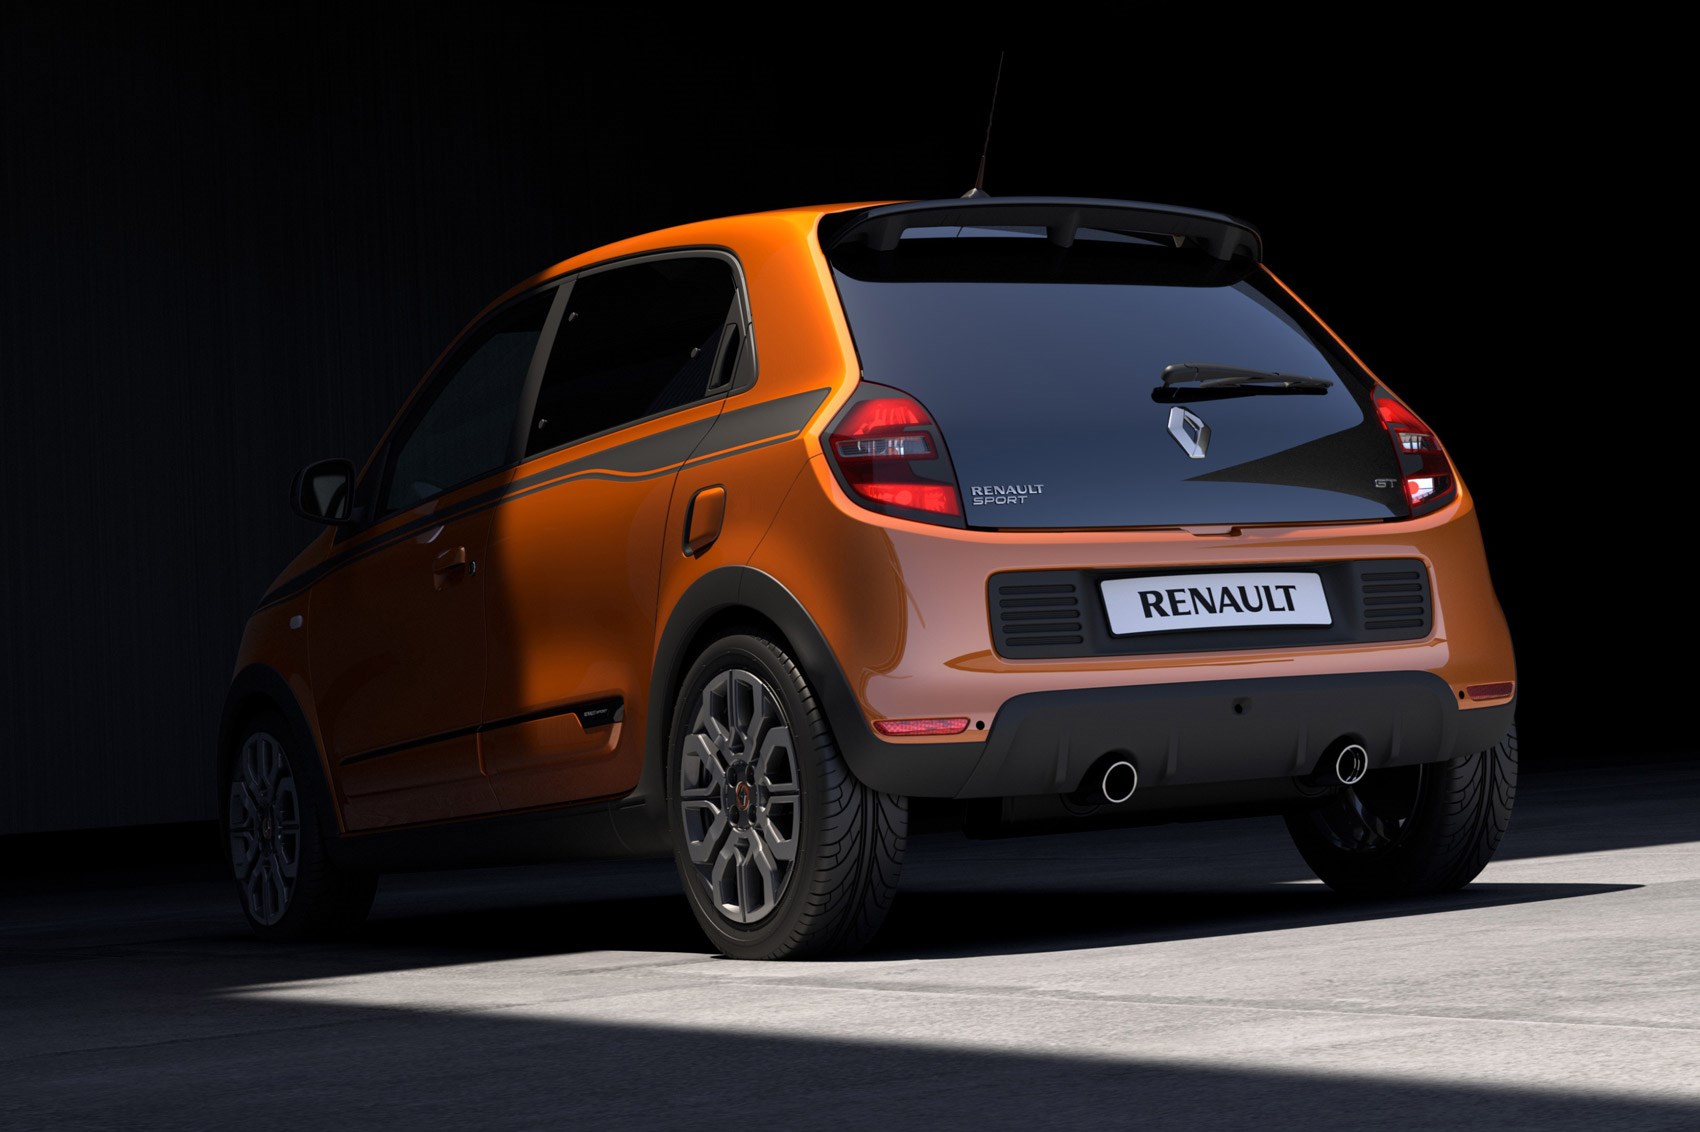 That's more like it: new Renault Twingo GT revealed